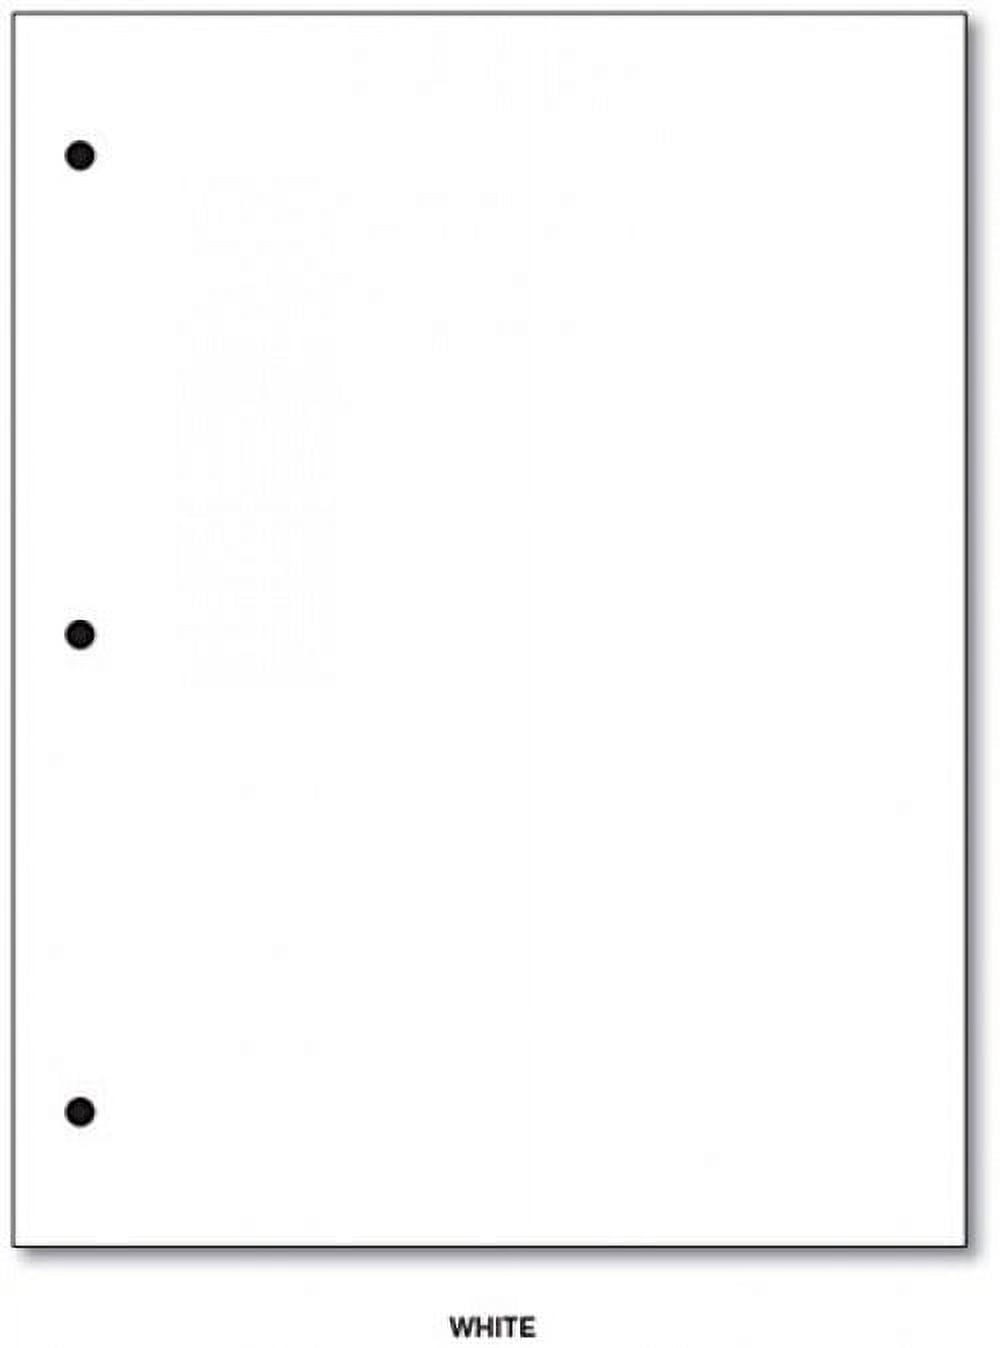 Homelove A5 Refill Paper [240 Sheets 480 Pages] 100 GSM Thick Blank Paper  6-Hole Punched Filler Inserts for 6 Ring Binder Journal Notebook 